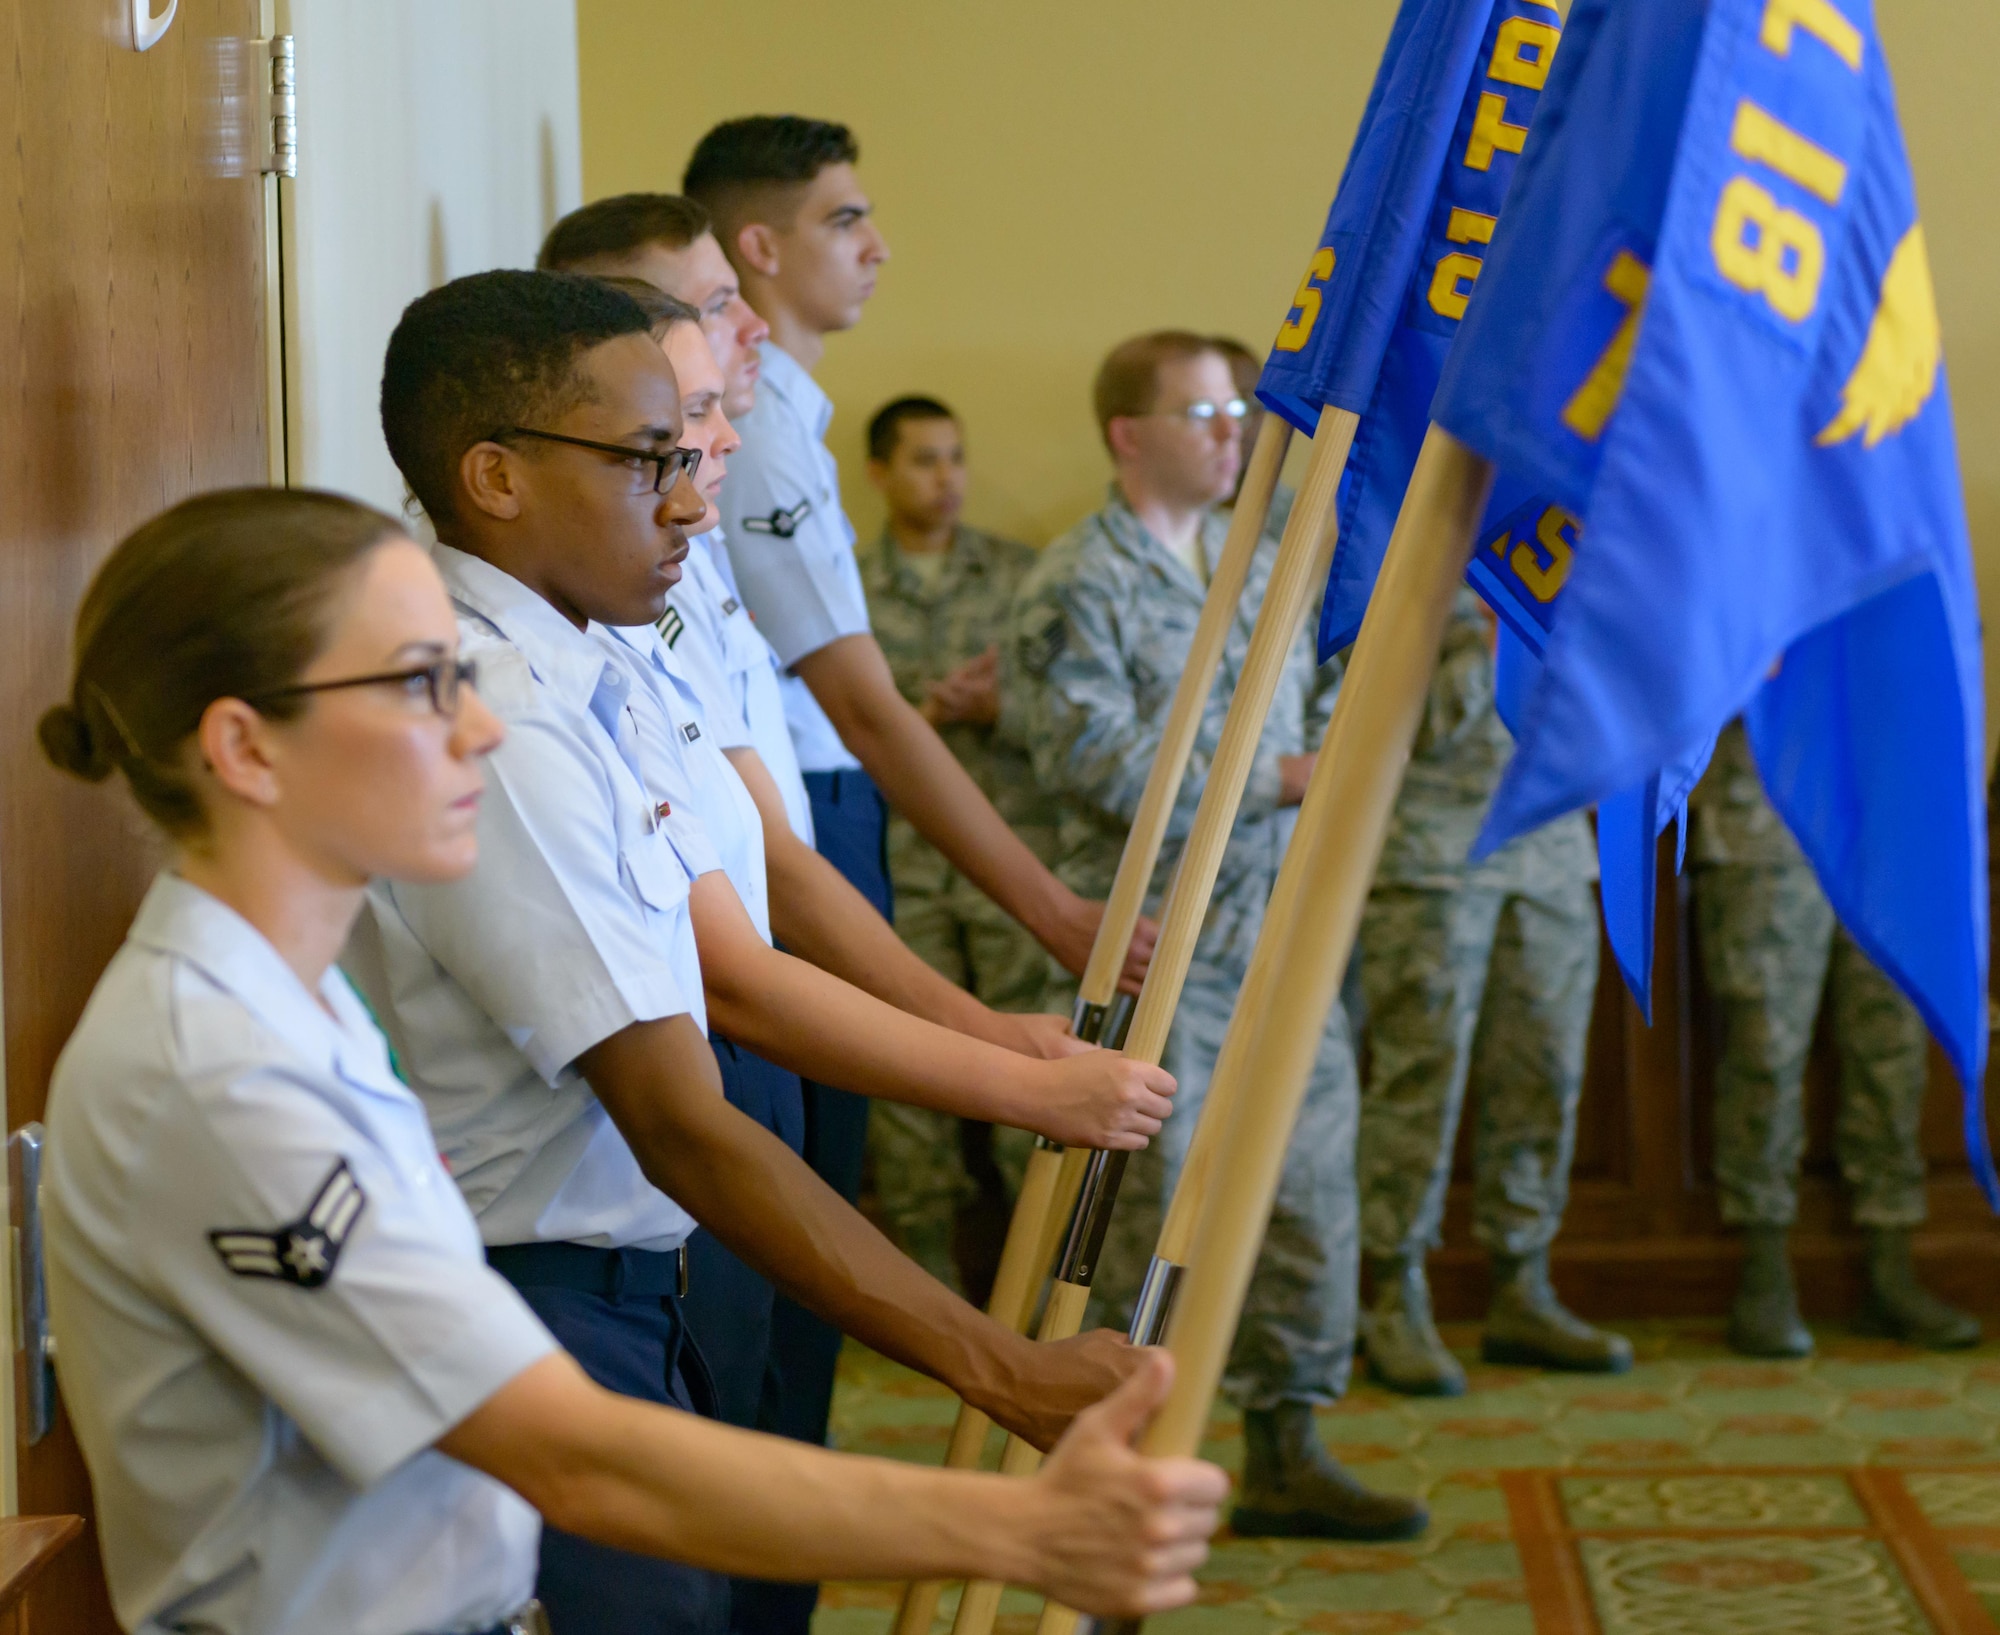 Airmen from the 81st Training Group hold Keesler squadron guidons during the 81st Training Wing change of command ceremony at the Bay Breeze Event Center June 2, 2017, on Keesler Air Force Base, Miss. The ceremony is a symbol of command being exchanged from one commander to the next by the handing-off of a ceremonial guidon. (U.S. Air Force photo by André Askew)